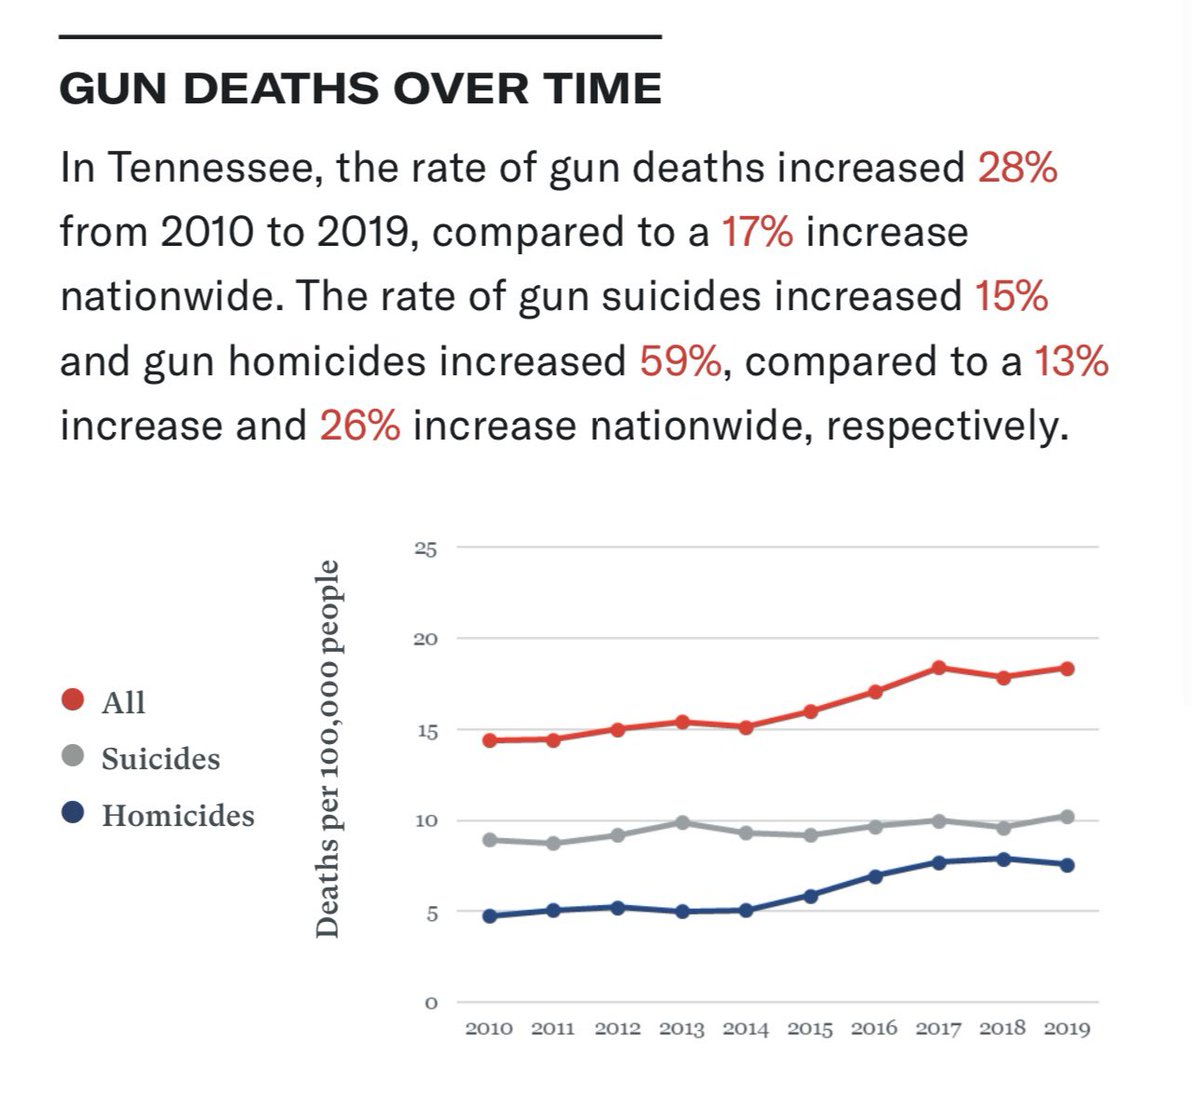 WHEN DO THE GUNS START MAKING US SAFER? Tennessee keeps weakening its gun laws, including passing permitless carry in 2021; meanwhile, the rate of gun homicide in Tennessee has increased 110% over the last decade. Shouldn’t Tennessee be one of the safest states in the nation?